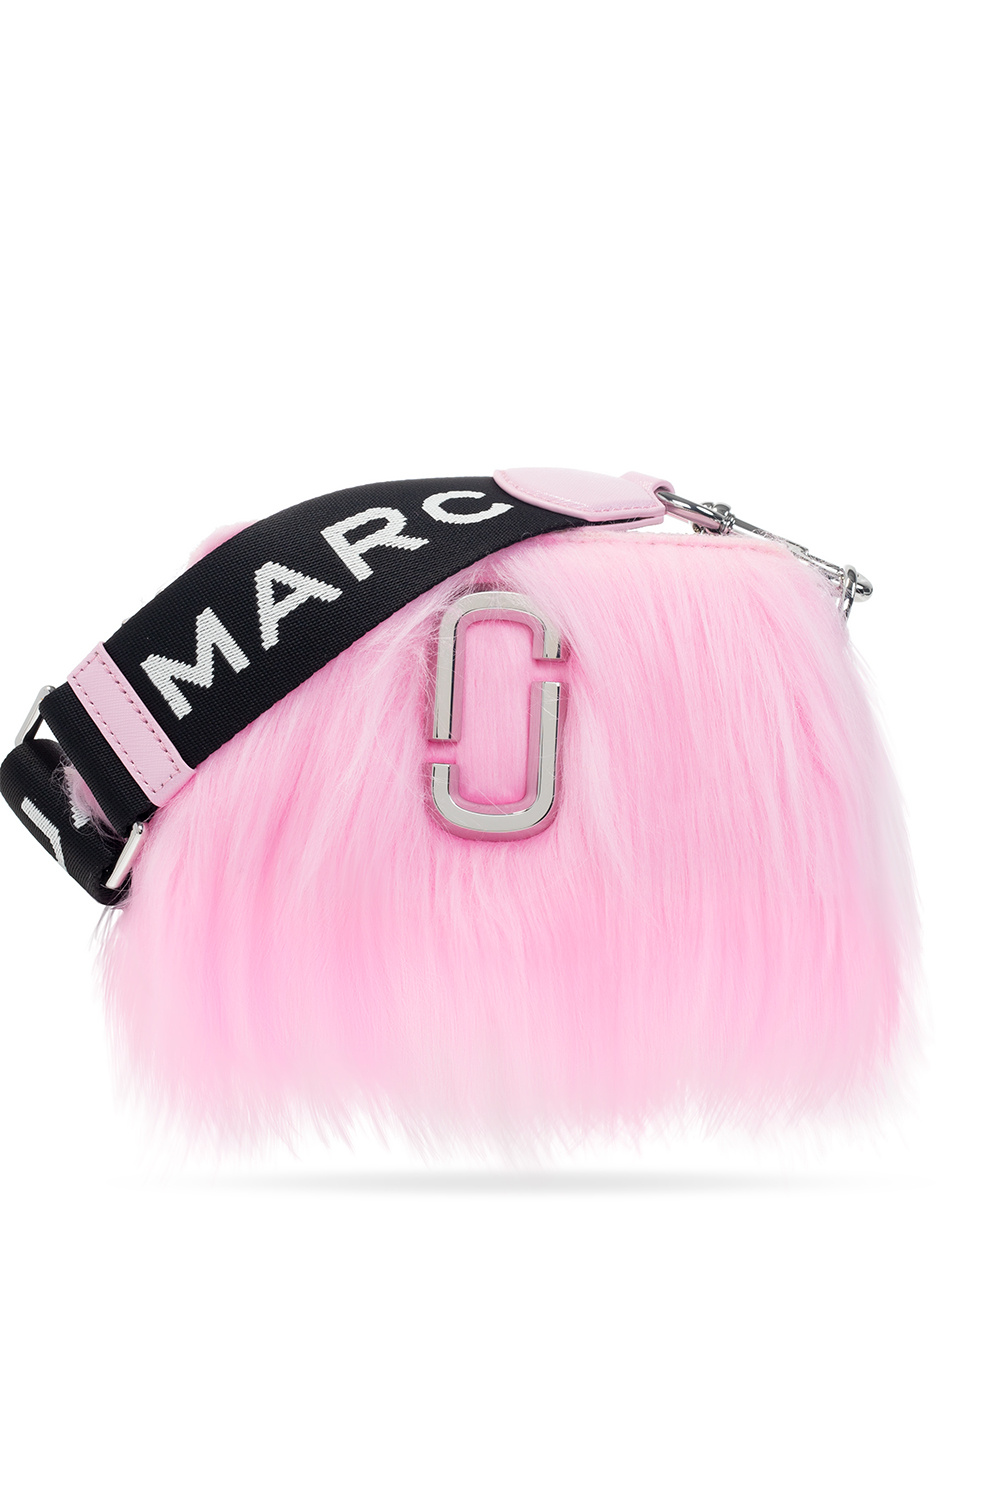 Marc Jacobs marc by marc jacobs small snapshot umhangetasche weiss rot und navy;